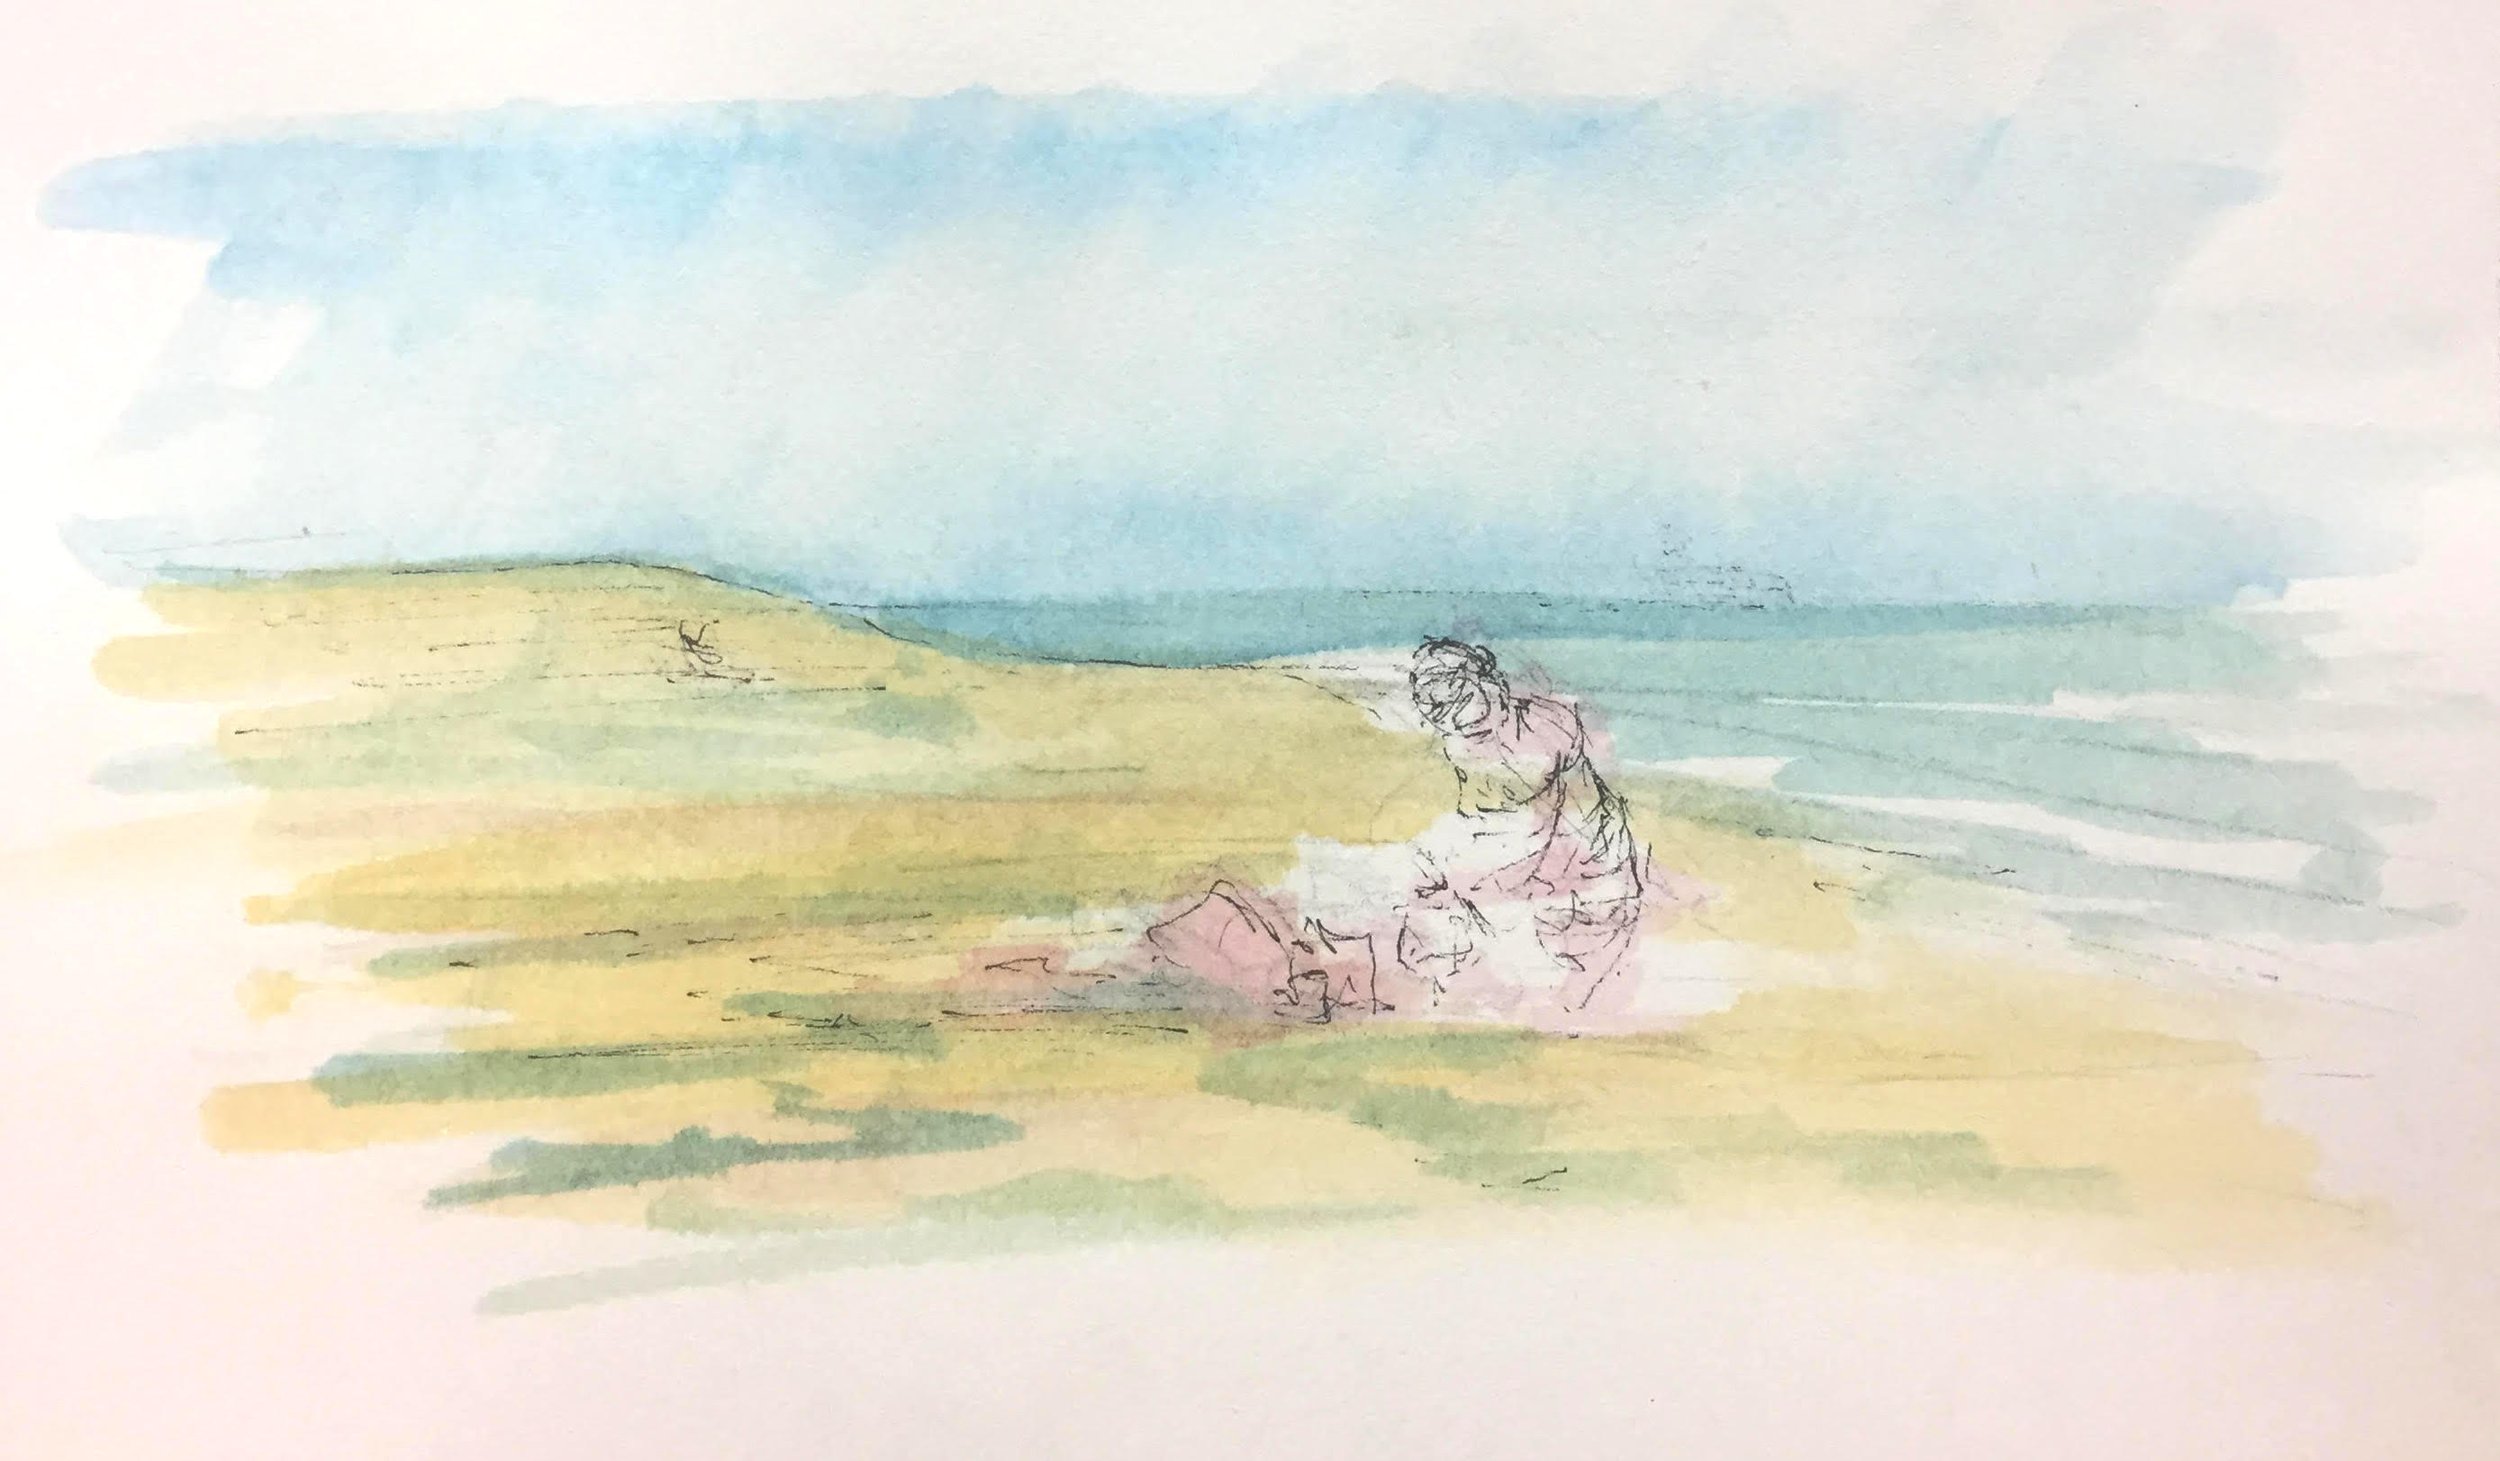   Untitled , Dauphin Island, Alabama, 2023  Watercolor and Micron Pen on Paper, 5 x 8.5” 